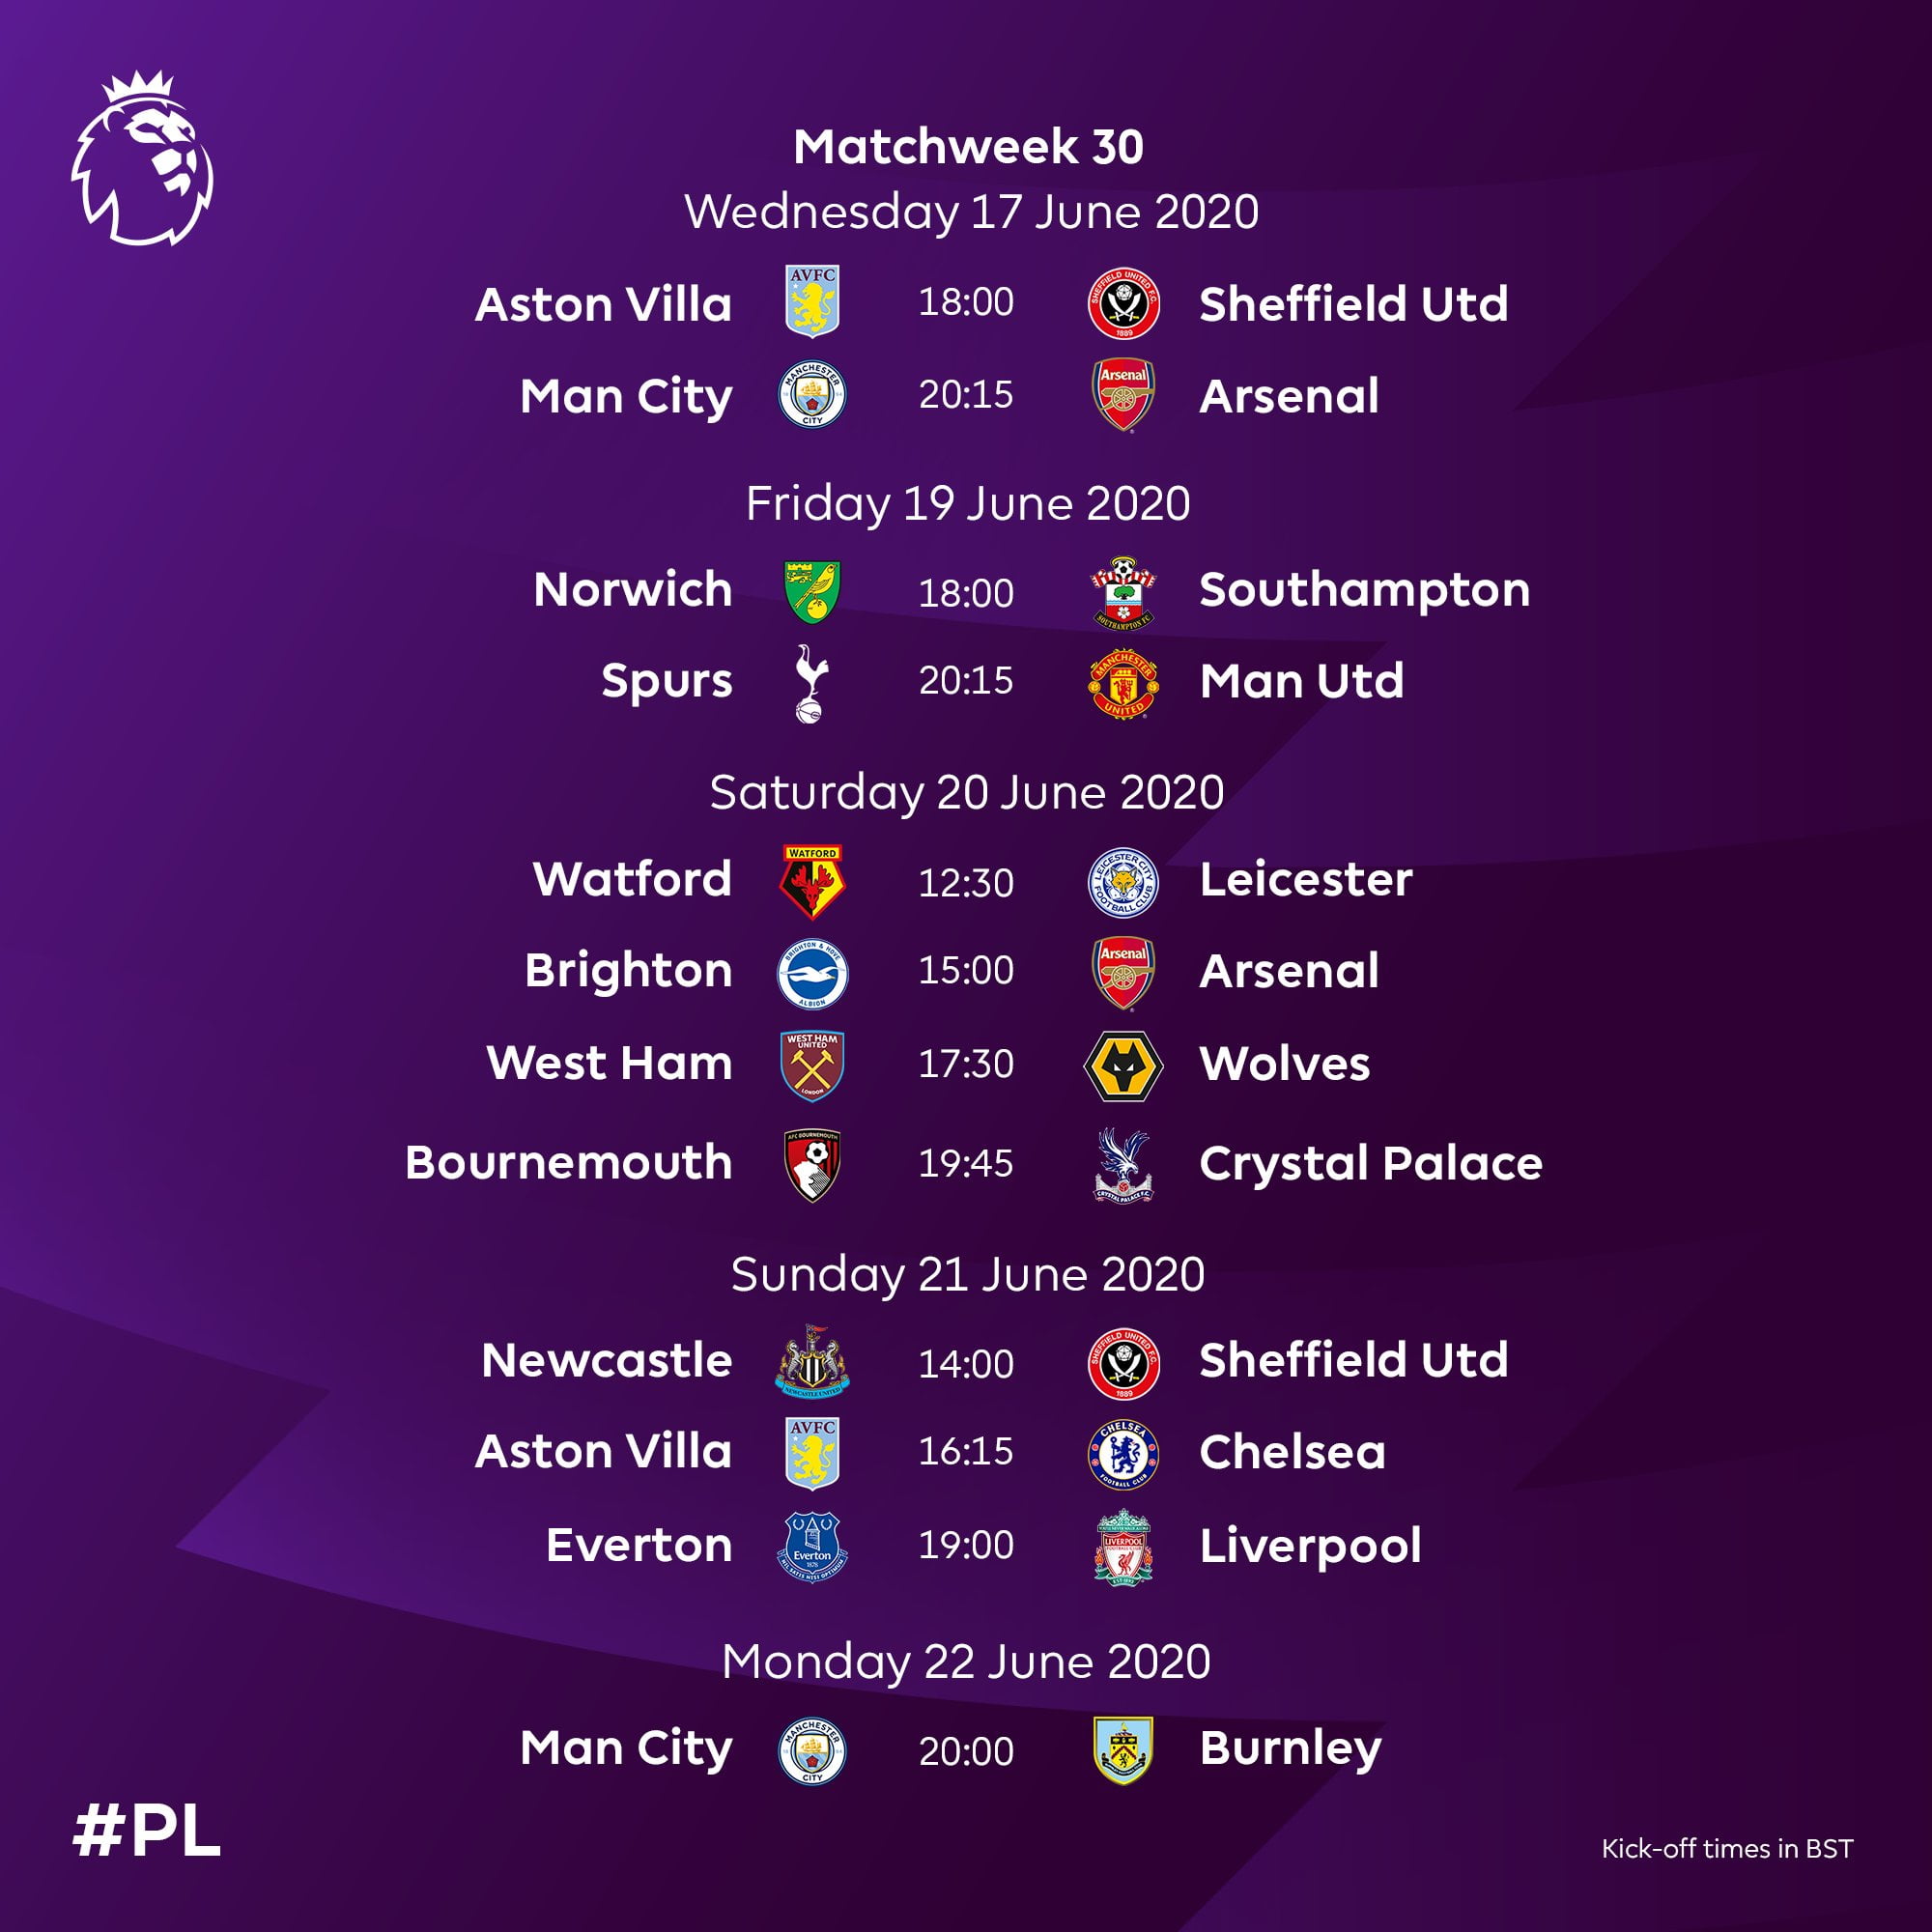 See Full Fixtures For The First 3 Match Days Of Resumed English Premier